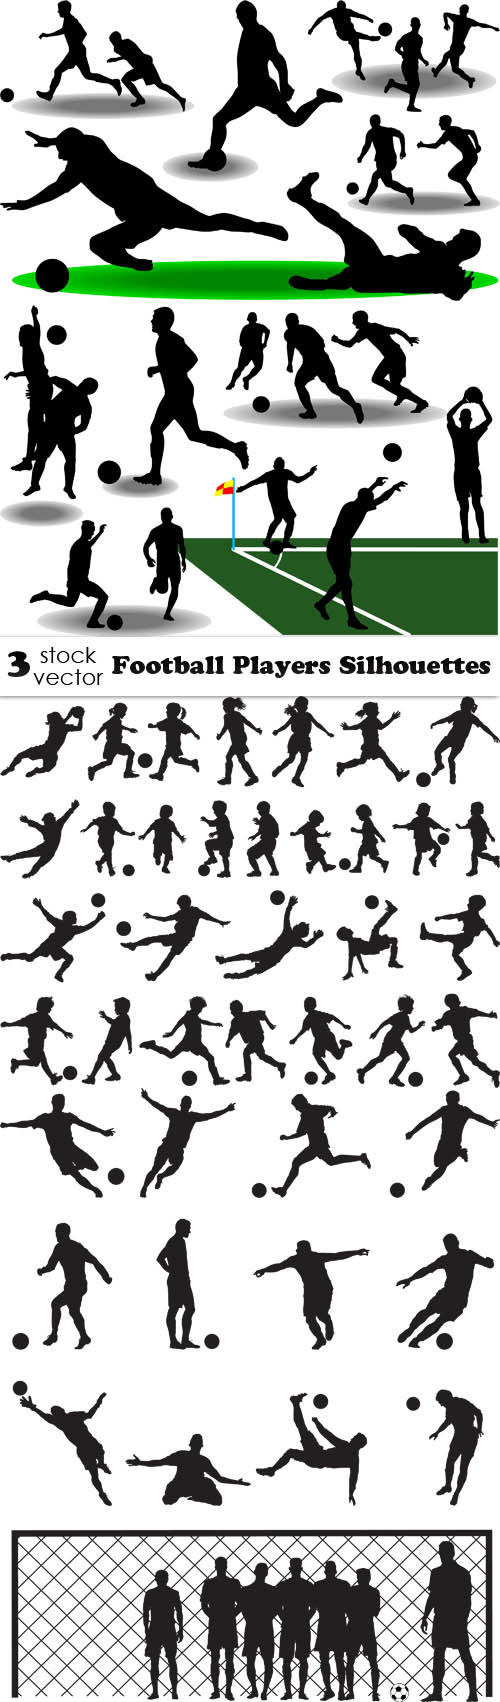 Vectors - Football Players Silhouettes 2